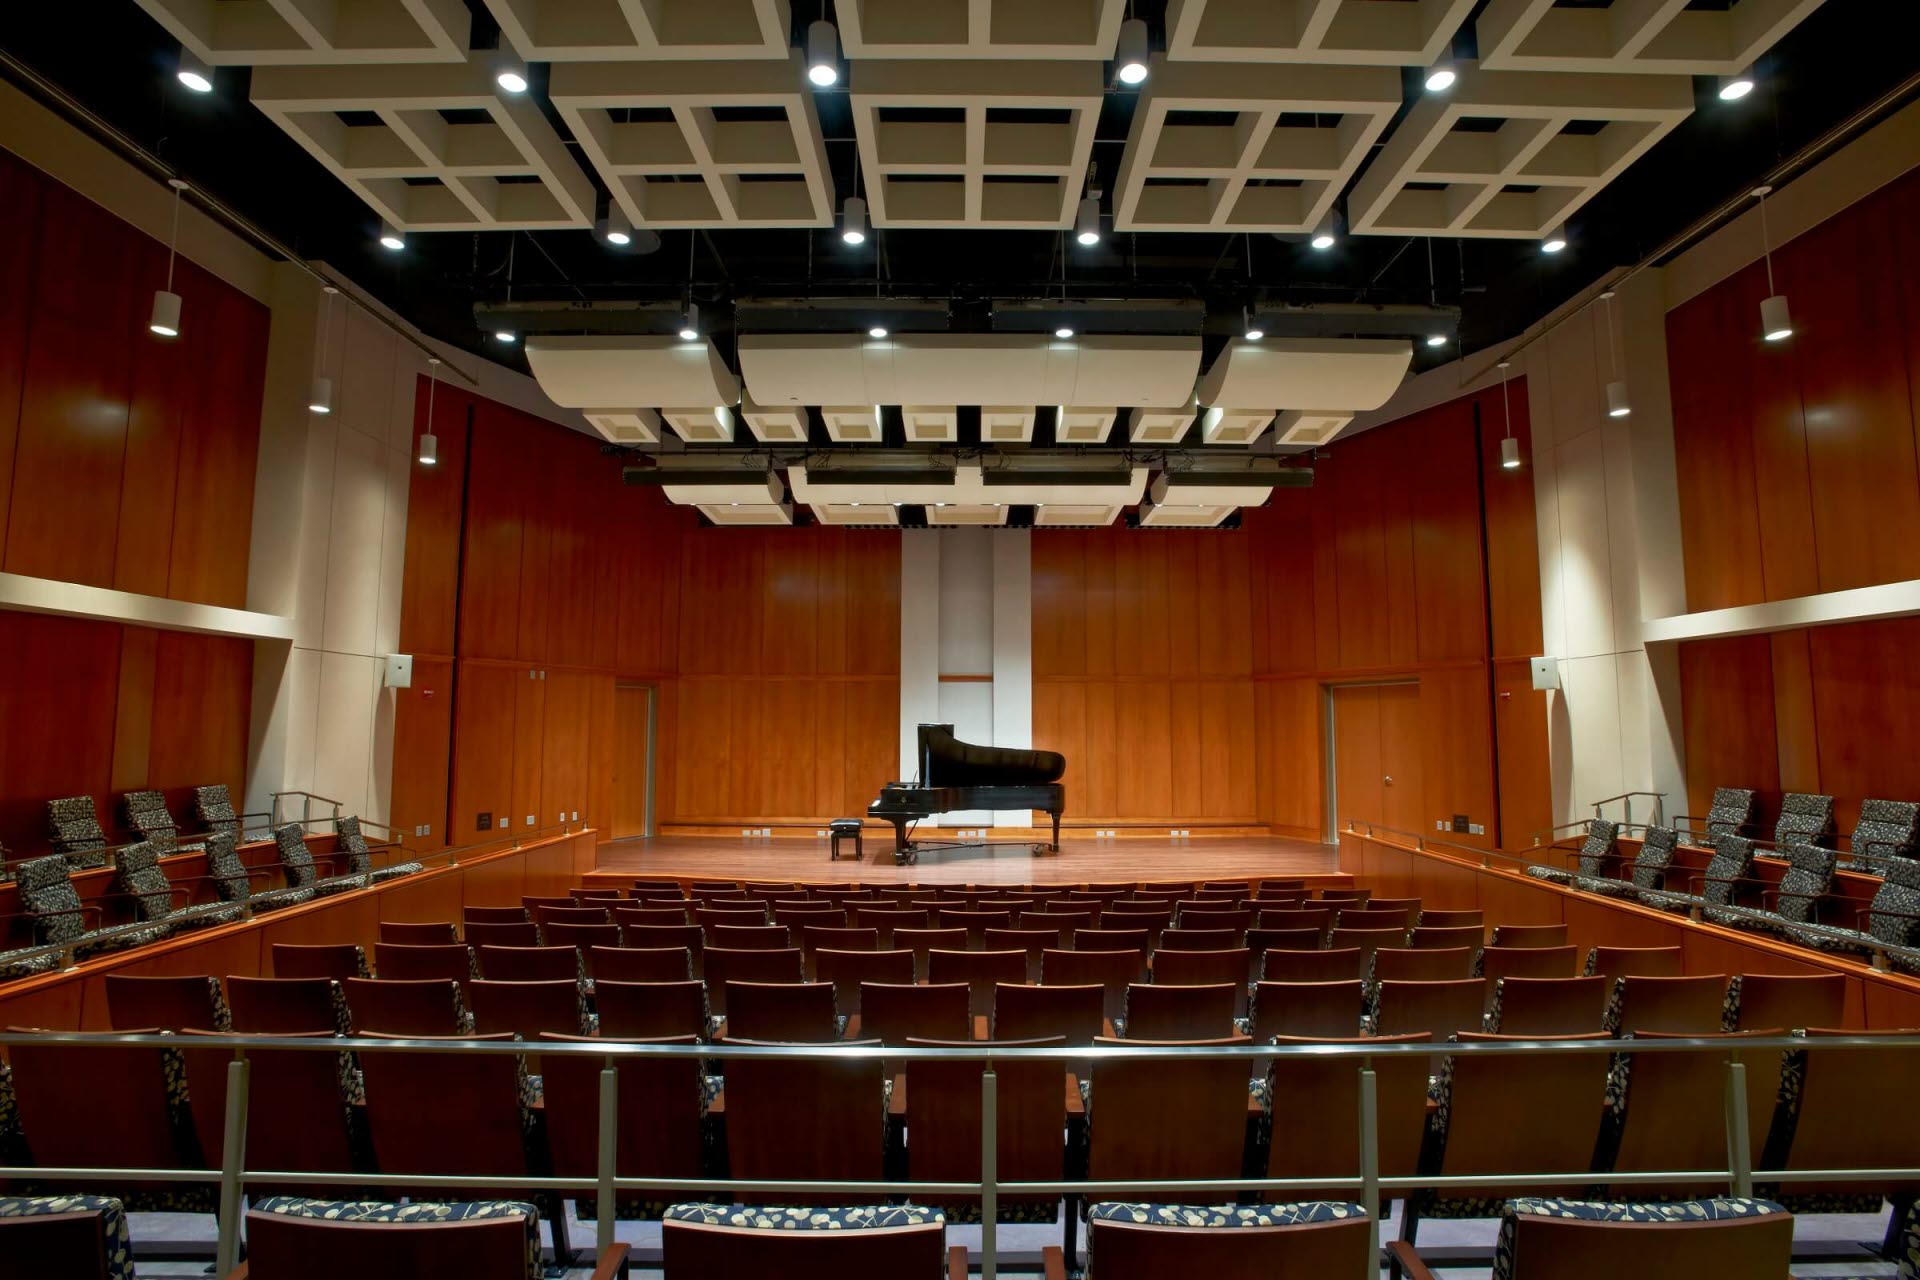 Messiah University - Calvin and Janet High Center for Worship and Performing Arts - Parmer Hall Stage